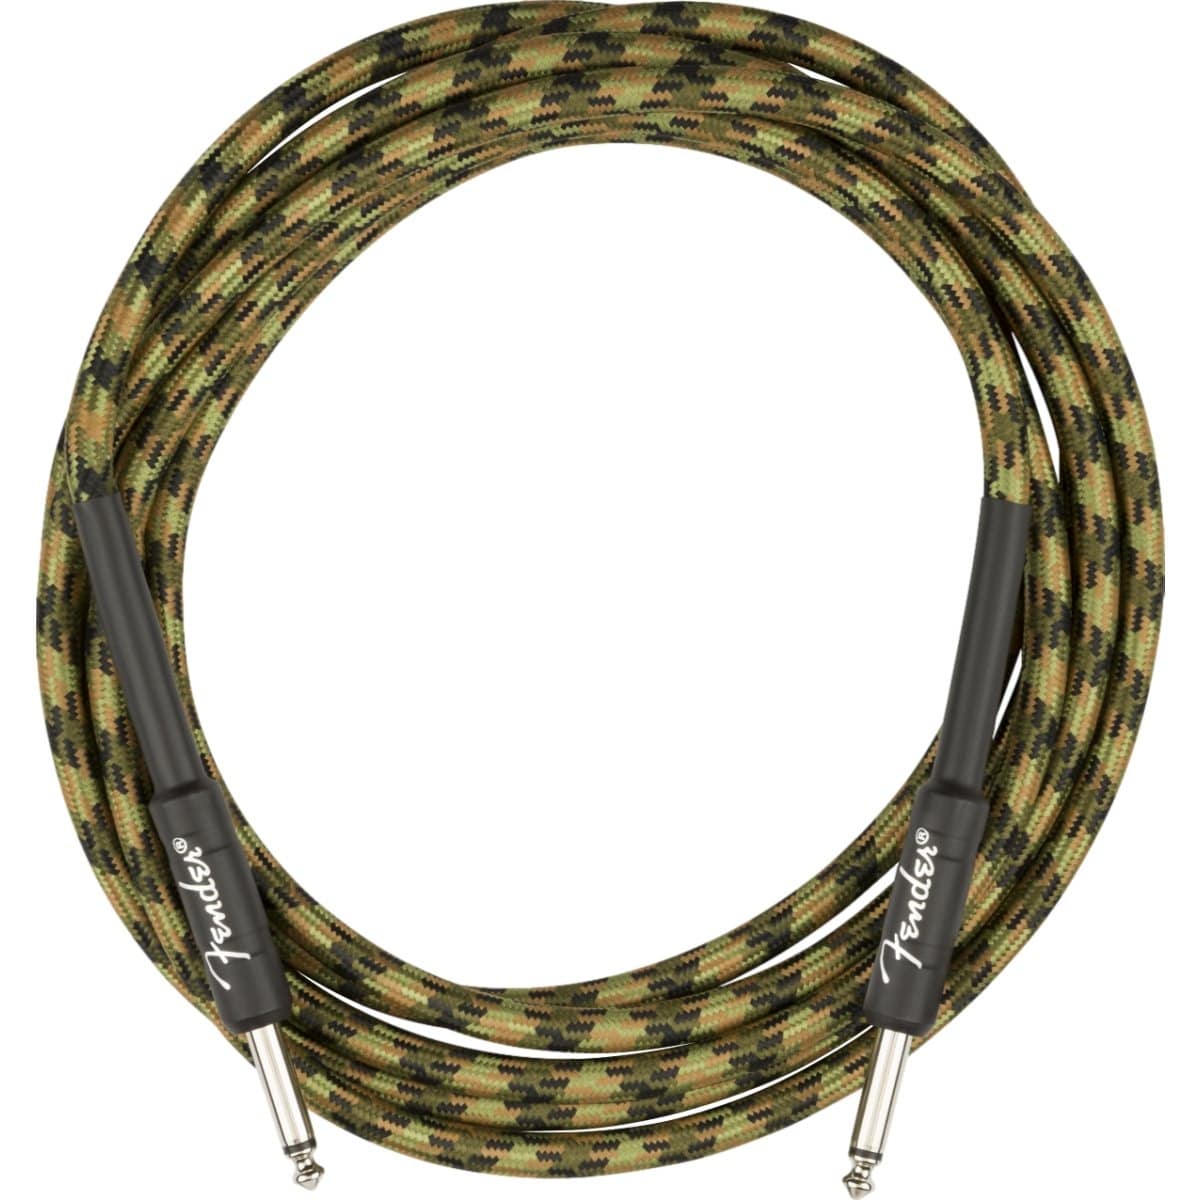 Fender Guitar Accessories Fender Guitar Cable Professional Series 18.6FT Woodland Camo - Byron Music